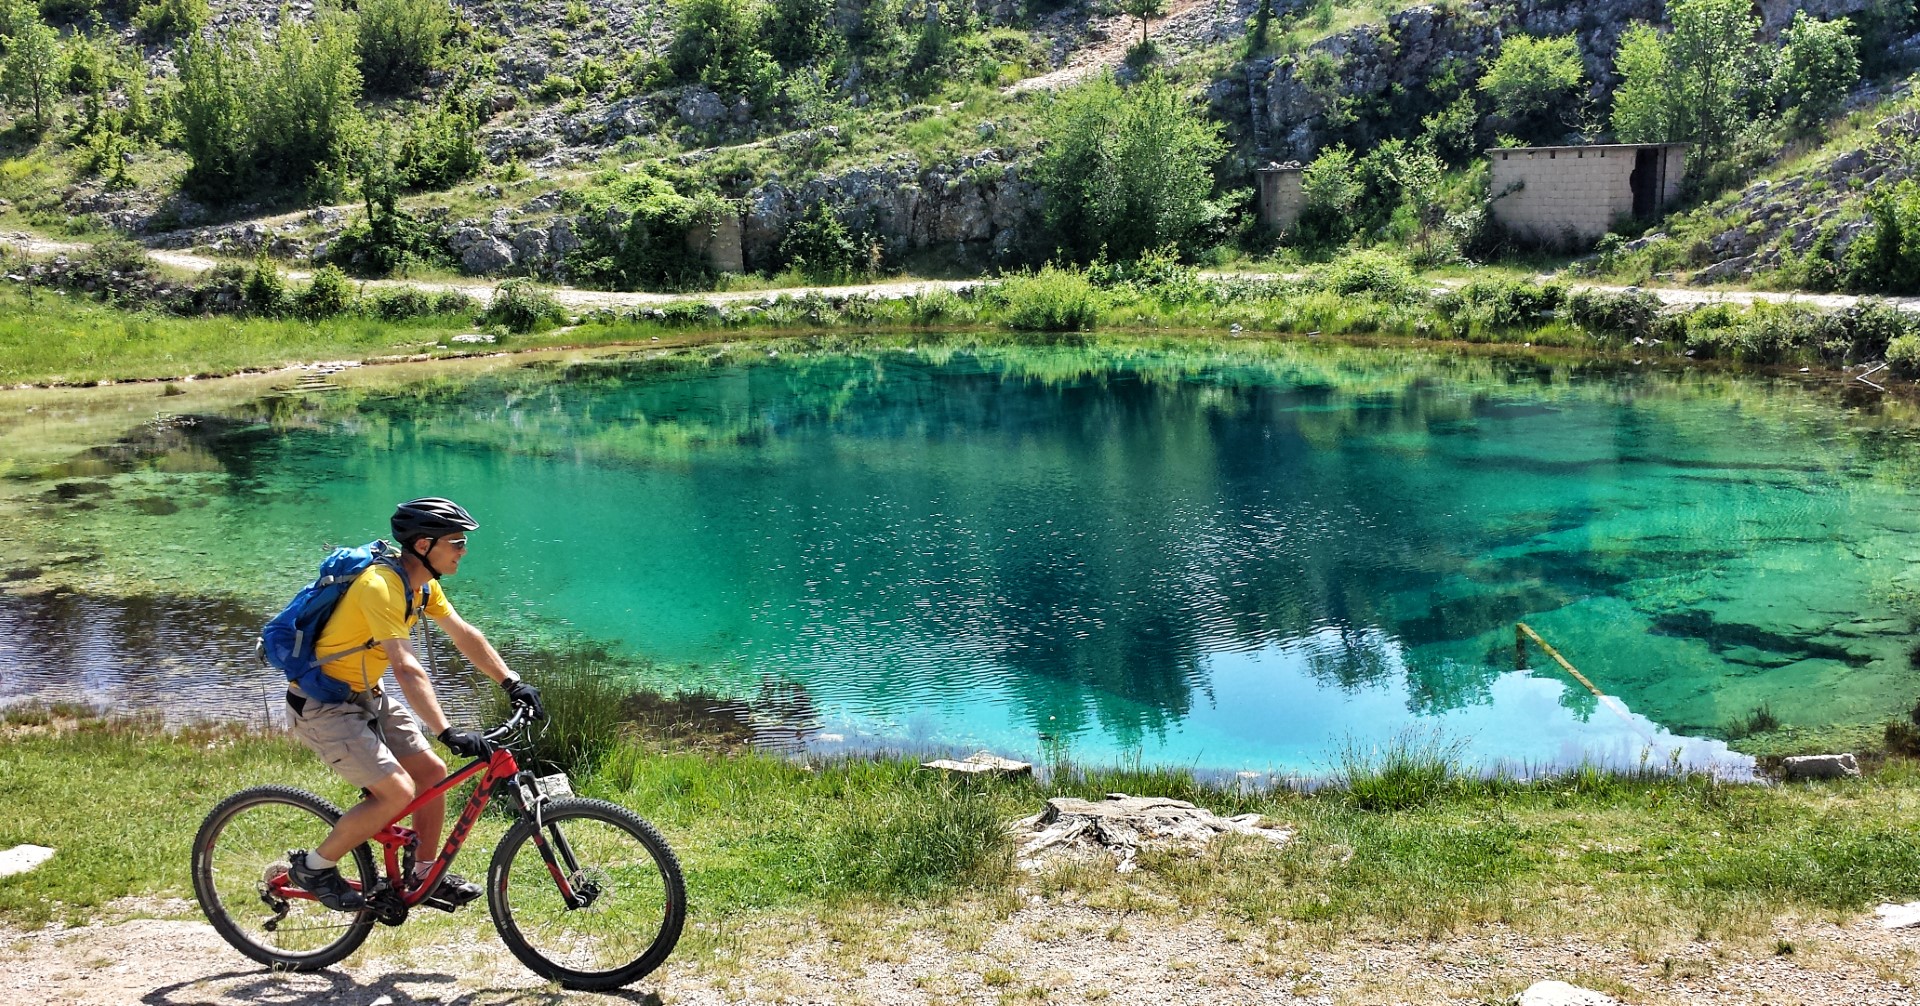 Amazing Cetina river source can be reached by mountain bike as well